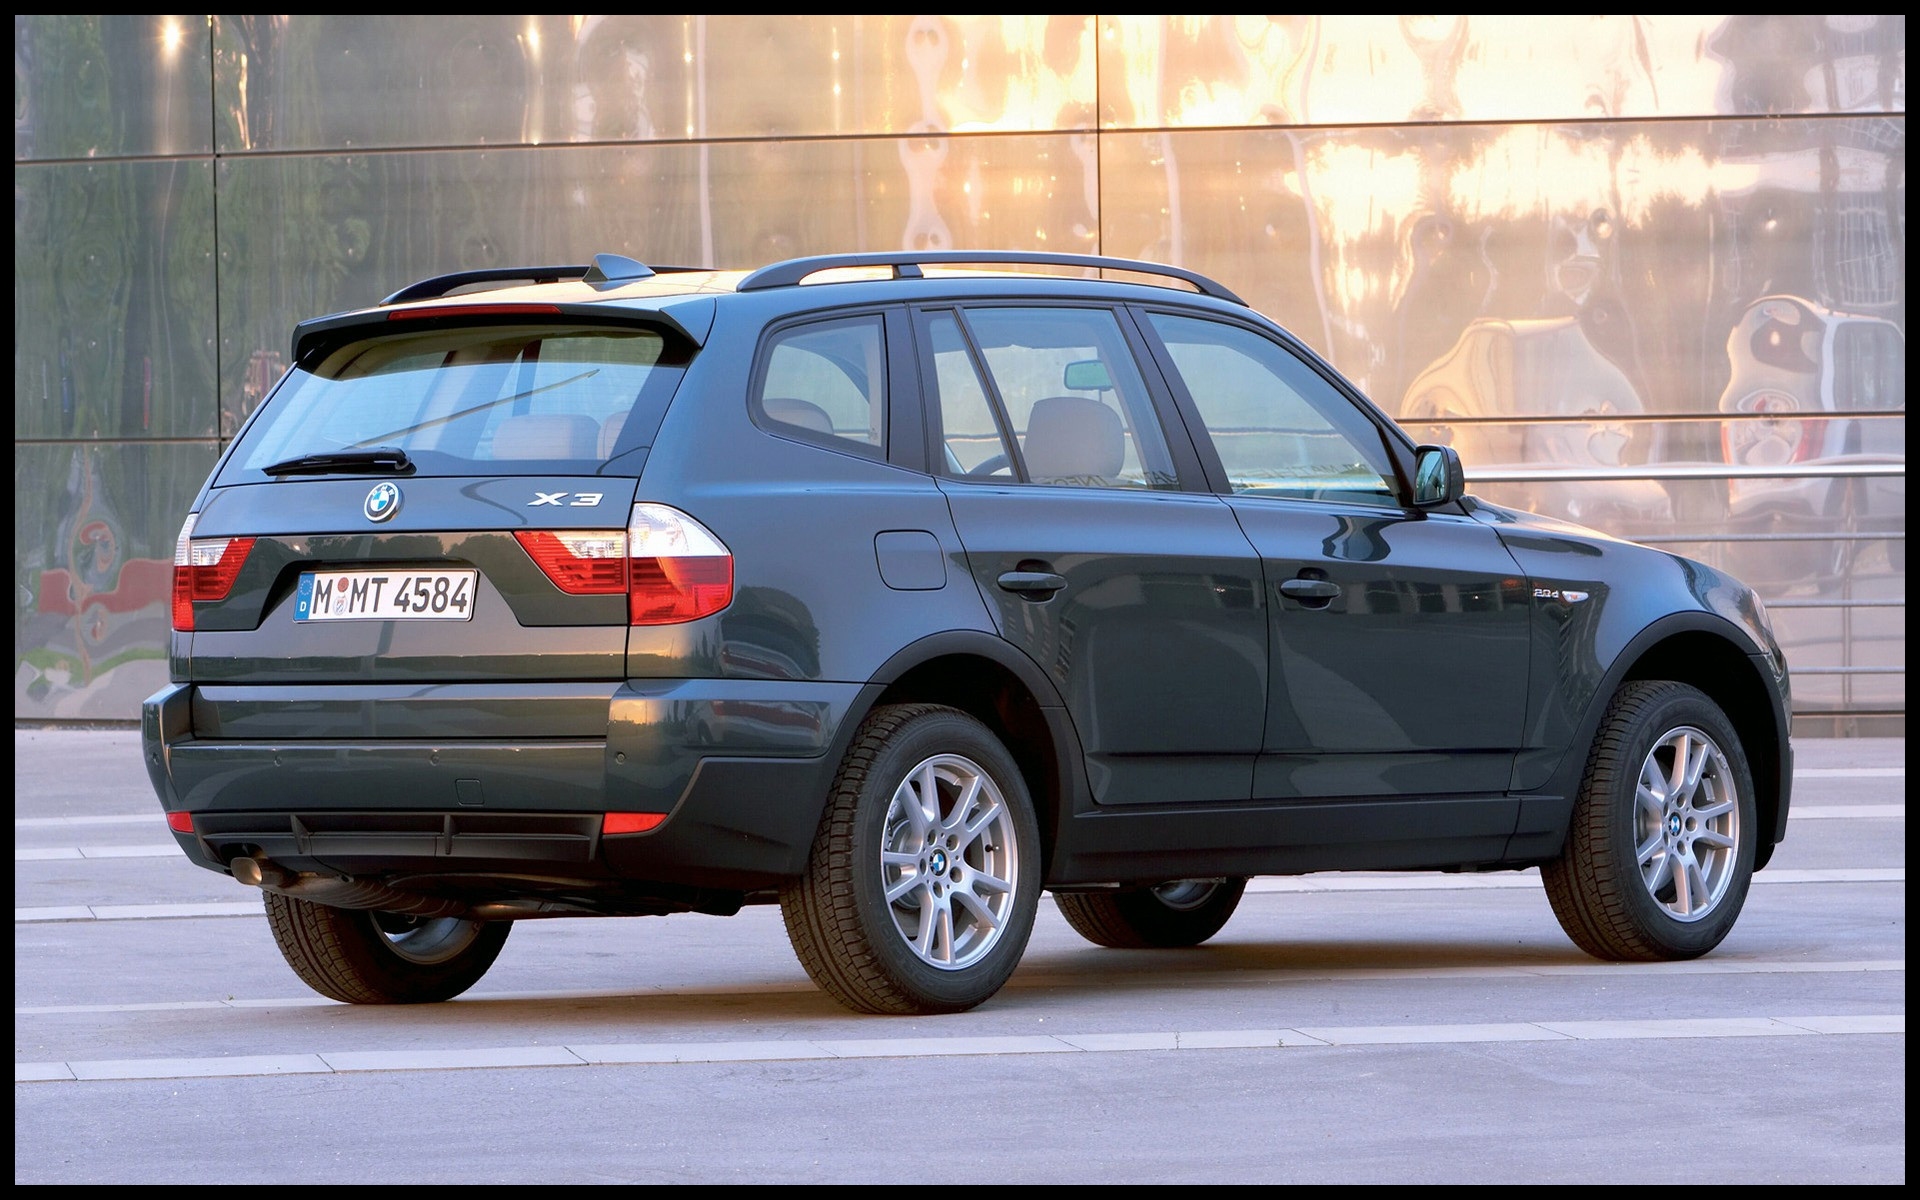 Car Image Moving Fresh Wallpapers That Move Awesome Bmw X3 2 0d 2007 Bmw E 21 Wallpaper